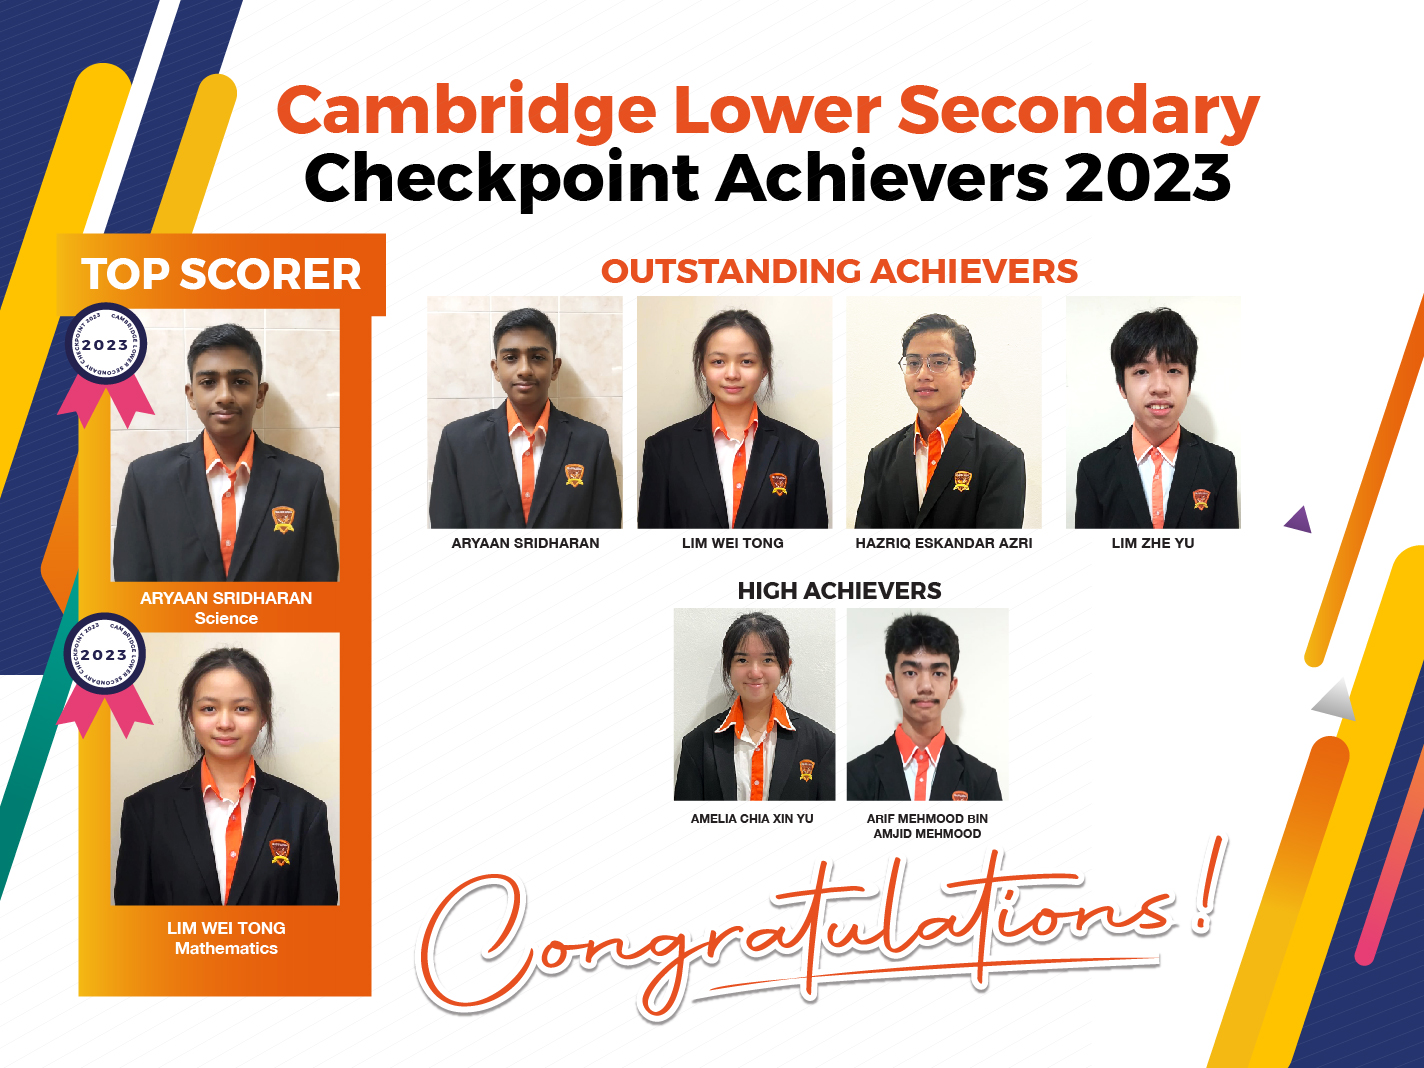 Cambridge Lower Secondary Checkpoint Achievers 